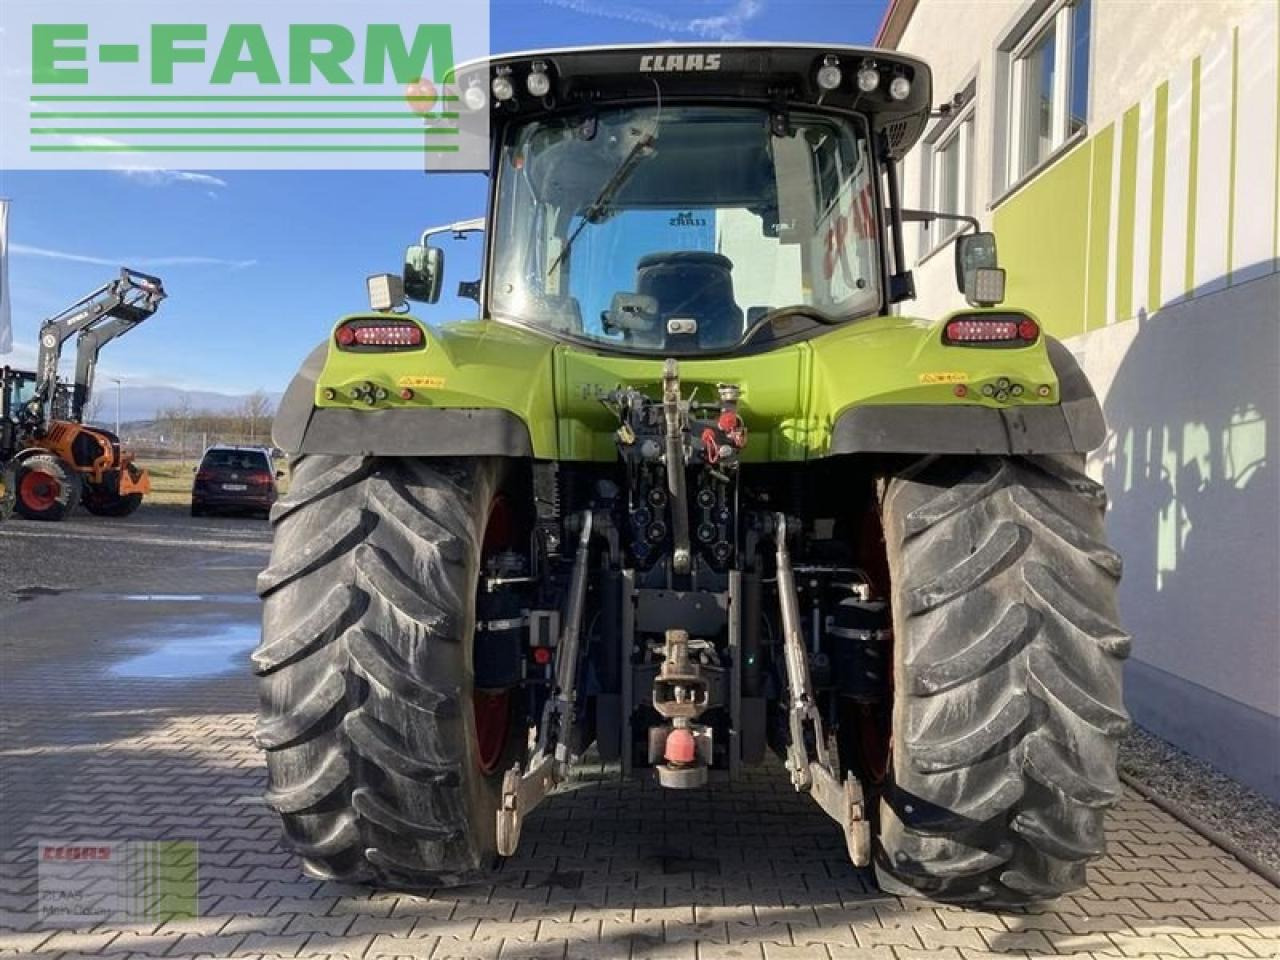 Tracteur agricole CLAAS arion 650 cmatic